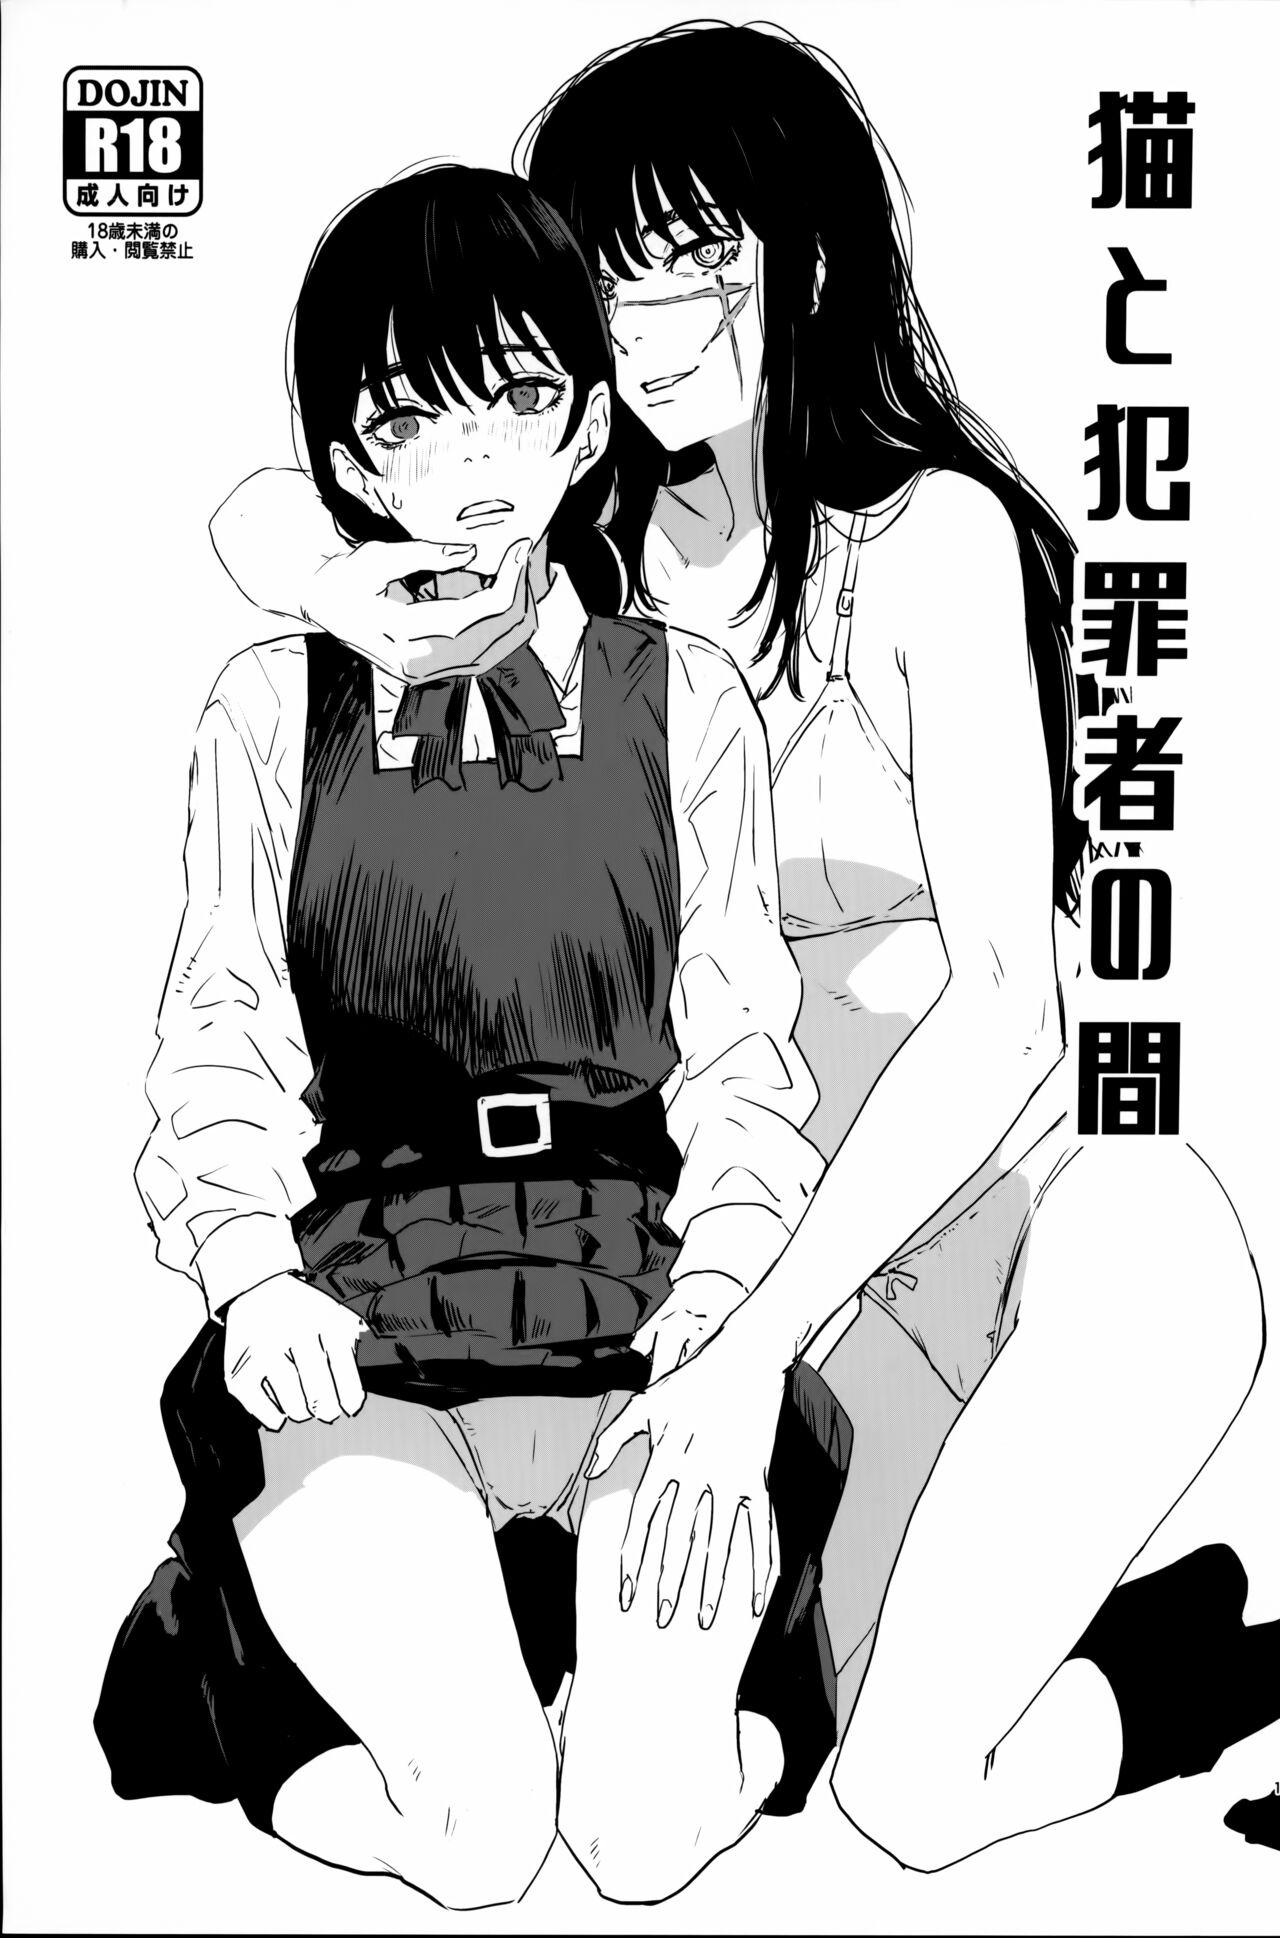 Nipples 猫と犯罪者の間 - Chainsaw man Classic - Page 1